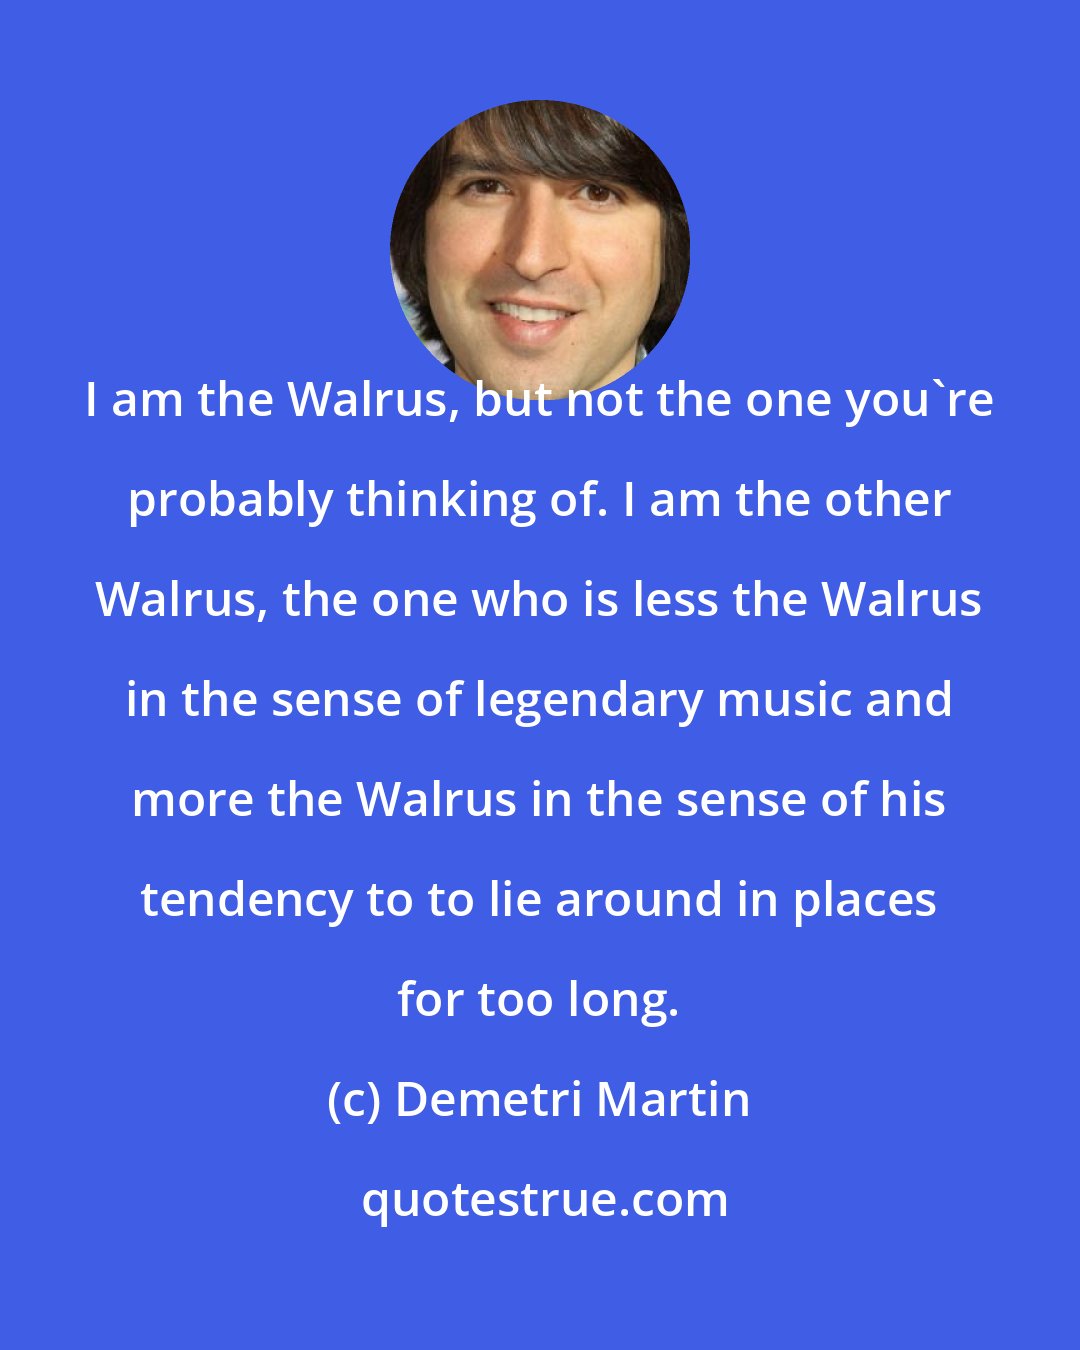 Demetri Martin: I am the Walrus, but not the one you're probably thinking of. I am the other Walrus, the one who is less the Walrus in the sense of legendary music and more the Walrus in the sense of his tendency to to lie around in places for too long.